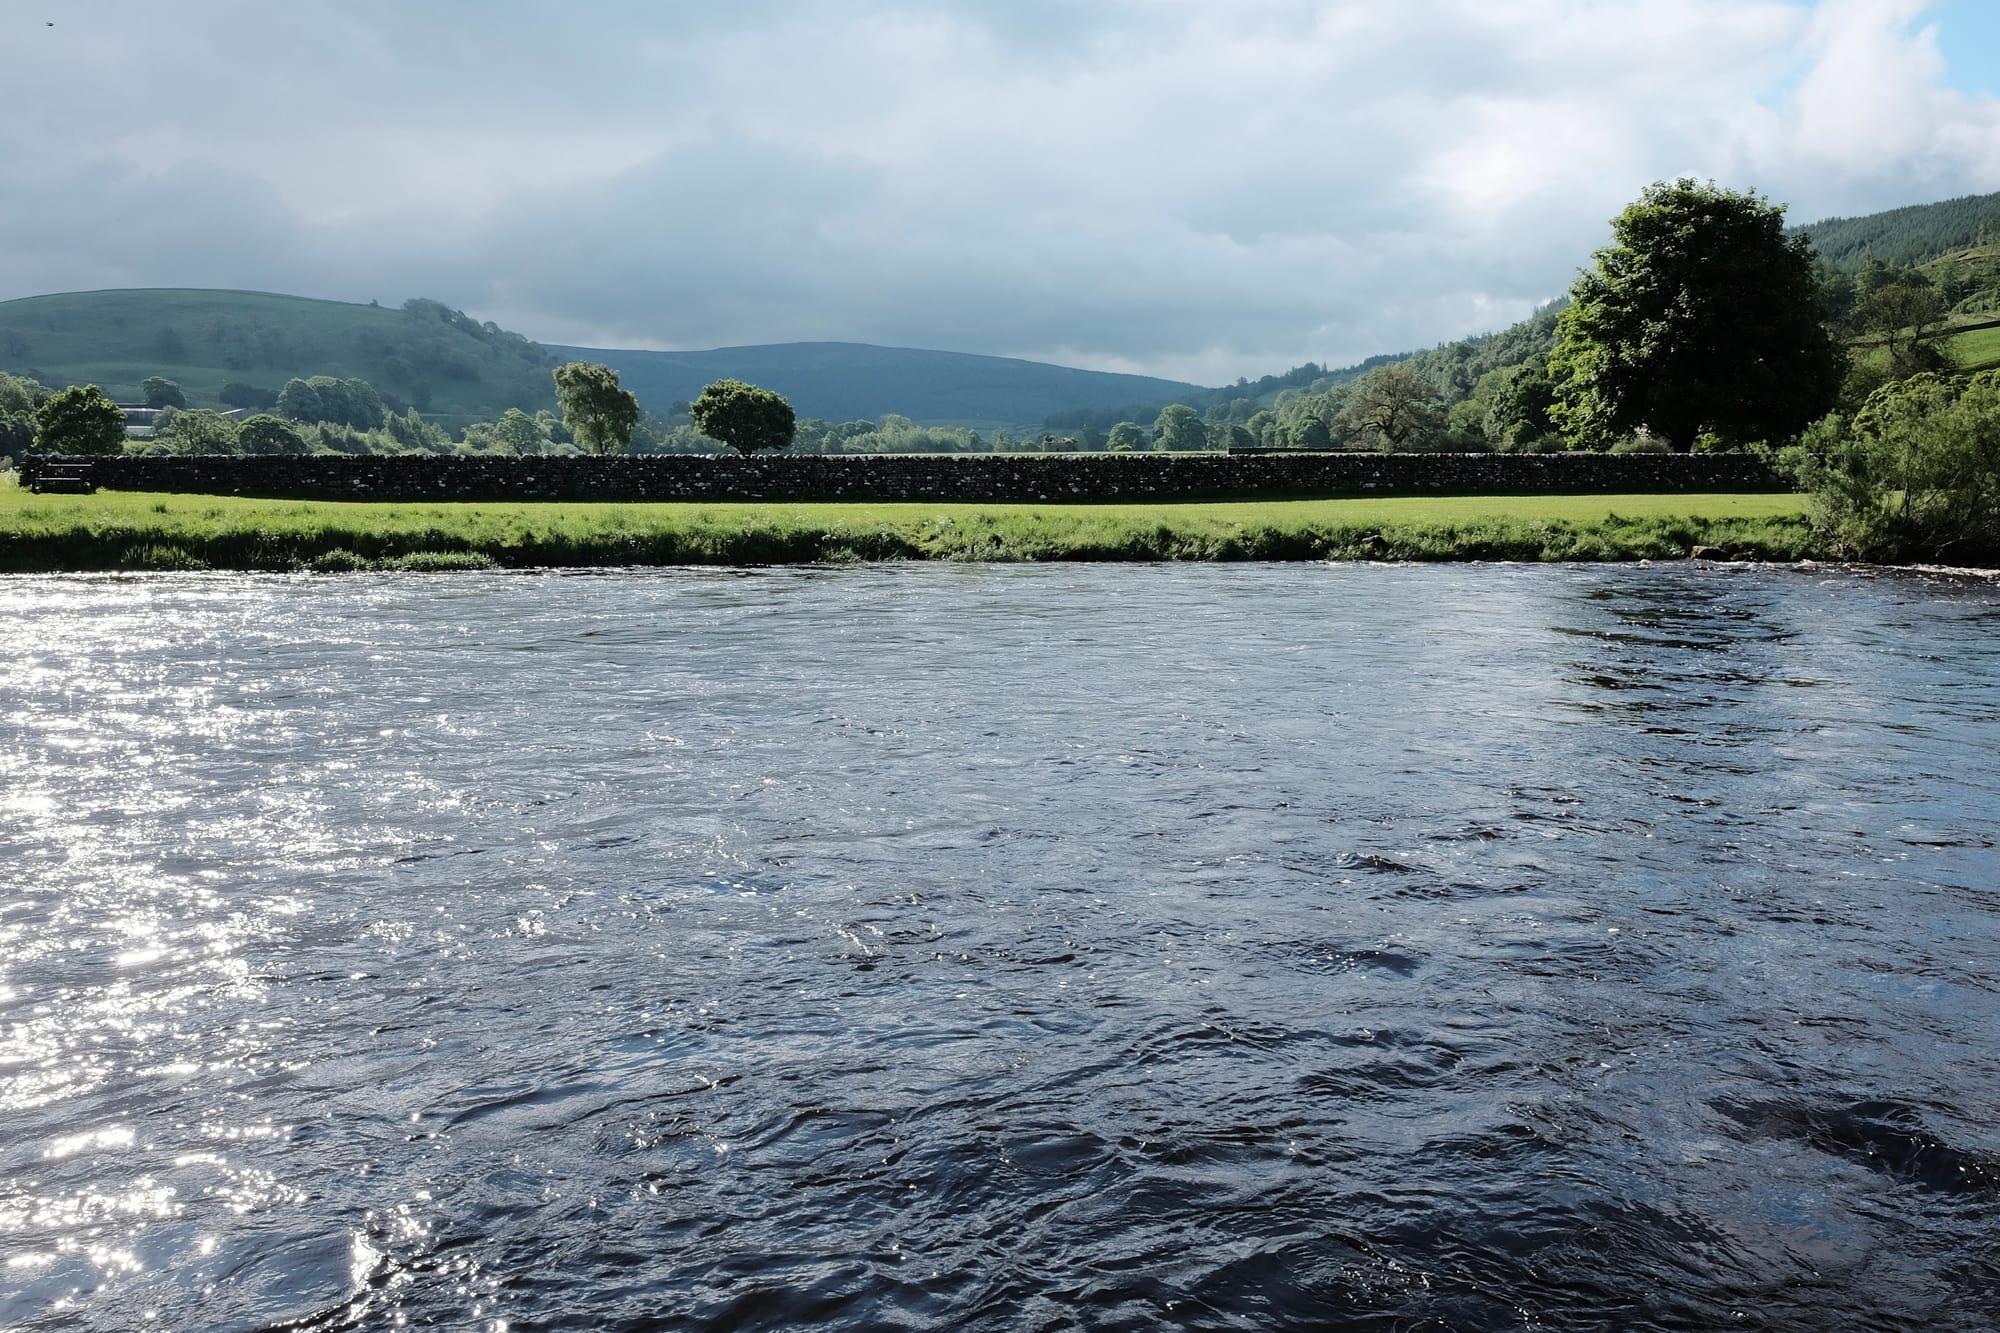 The view of the River Wharfe from Burnsall, water lapping at grassy banks with a stone wall and high ground in the distance.